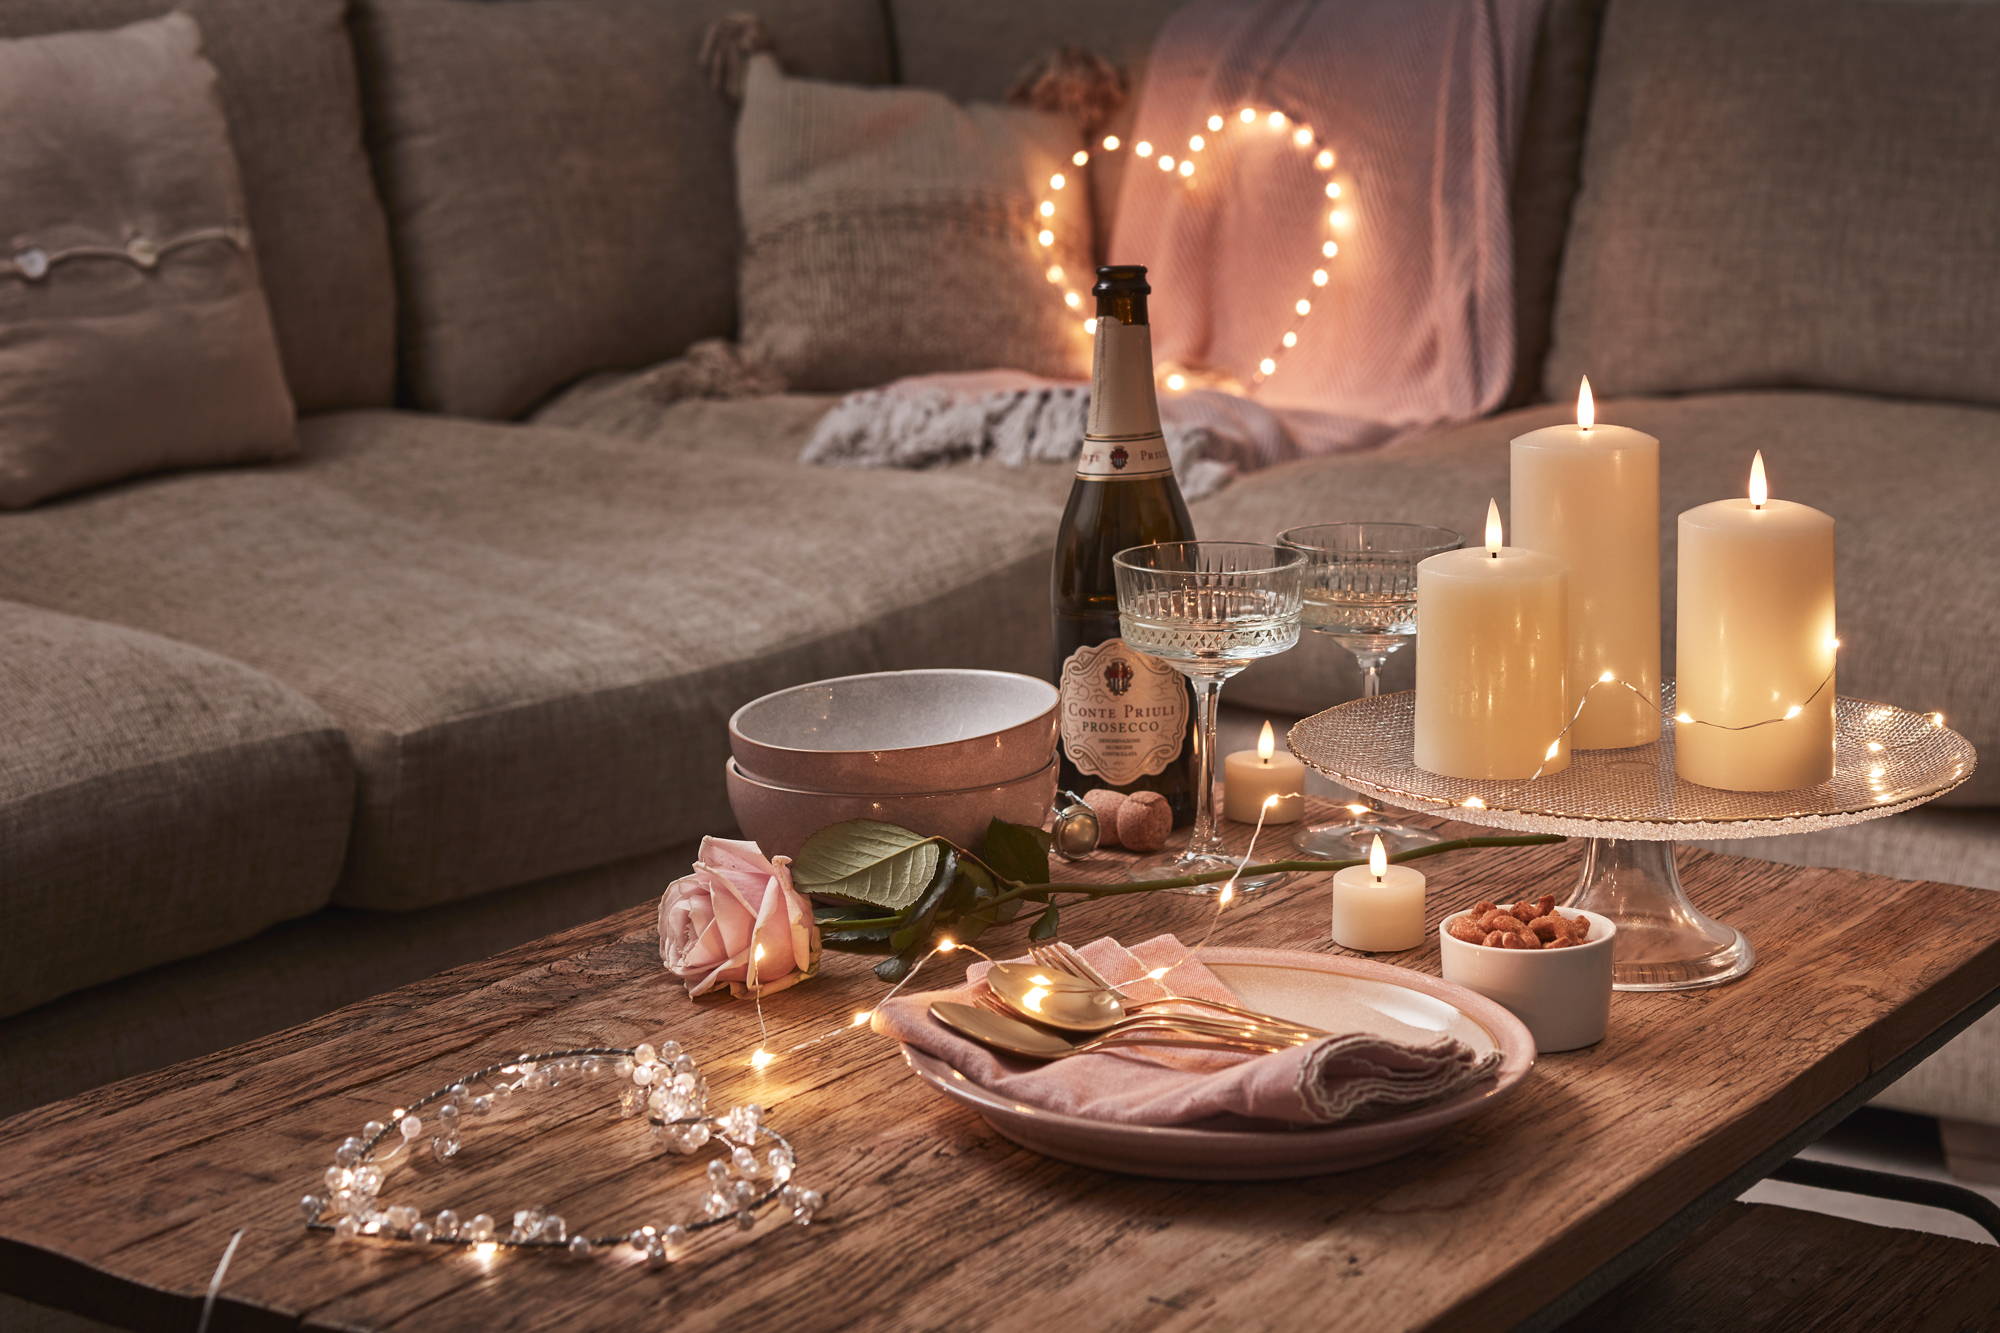 Date night setting with candles, fairy lights and champagne on a table and heart lights on the sofa. 